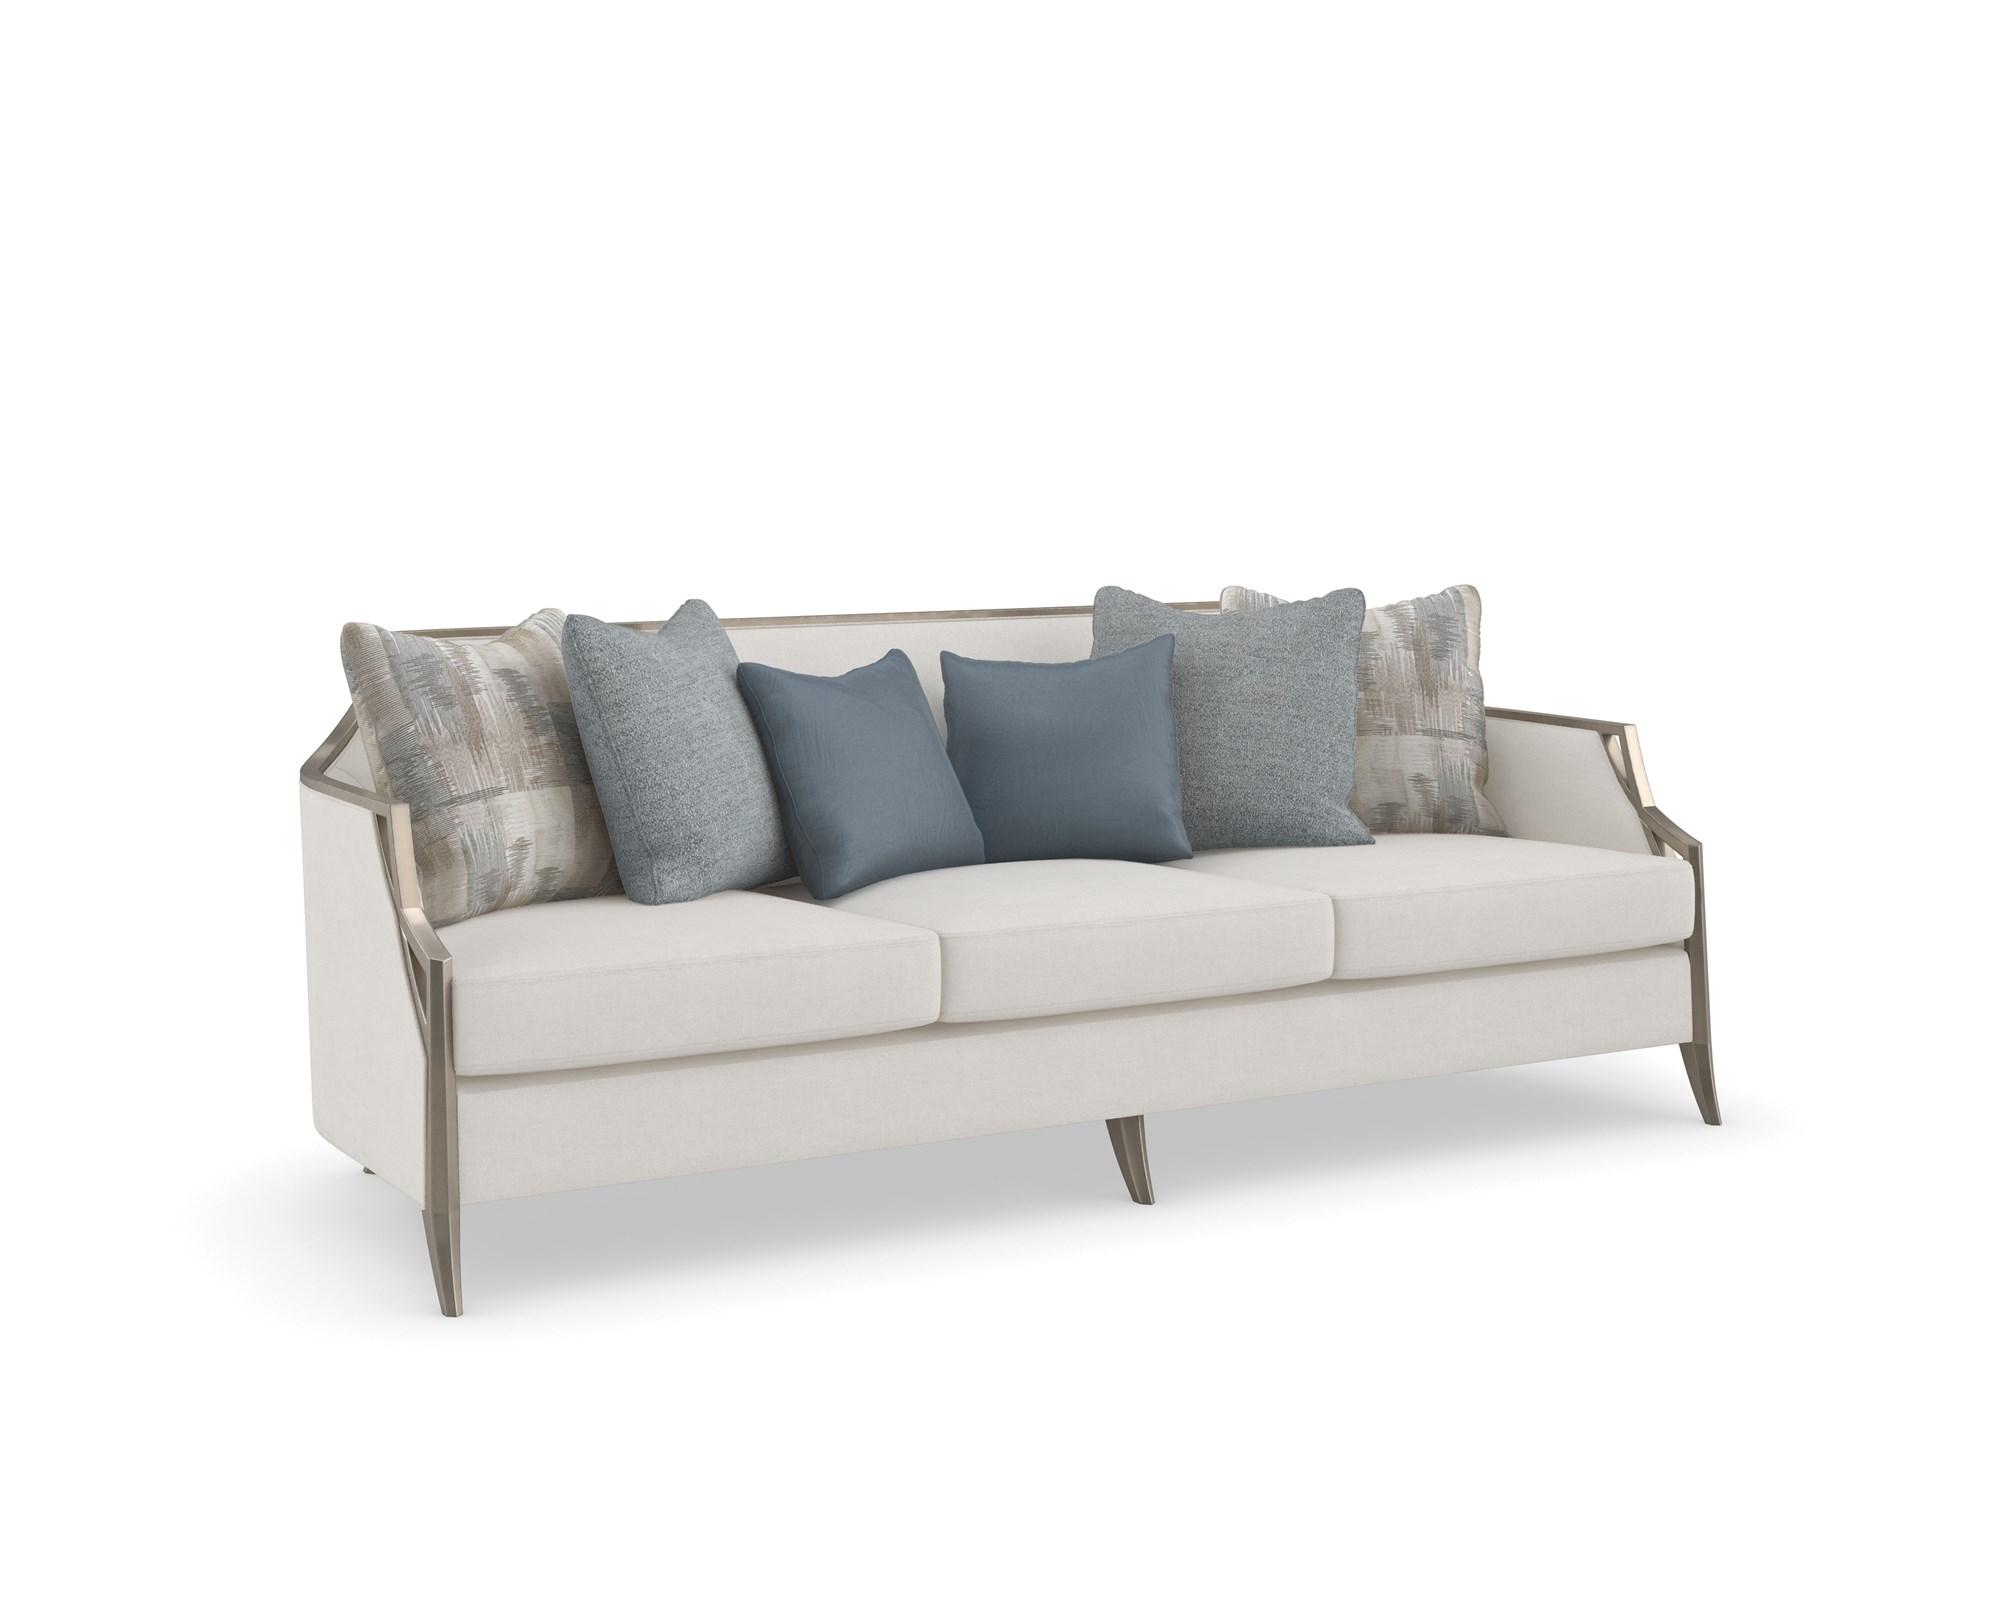 Classic Sofa X FACTOR UPH-021-013-A in Light Gray Fabric